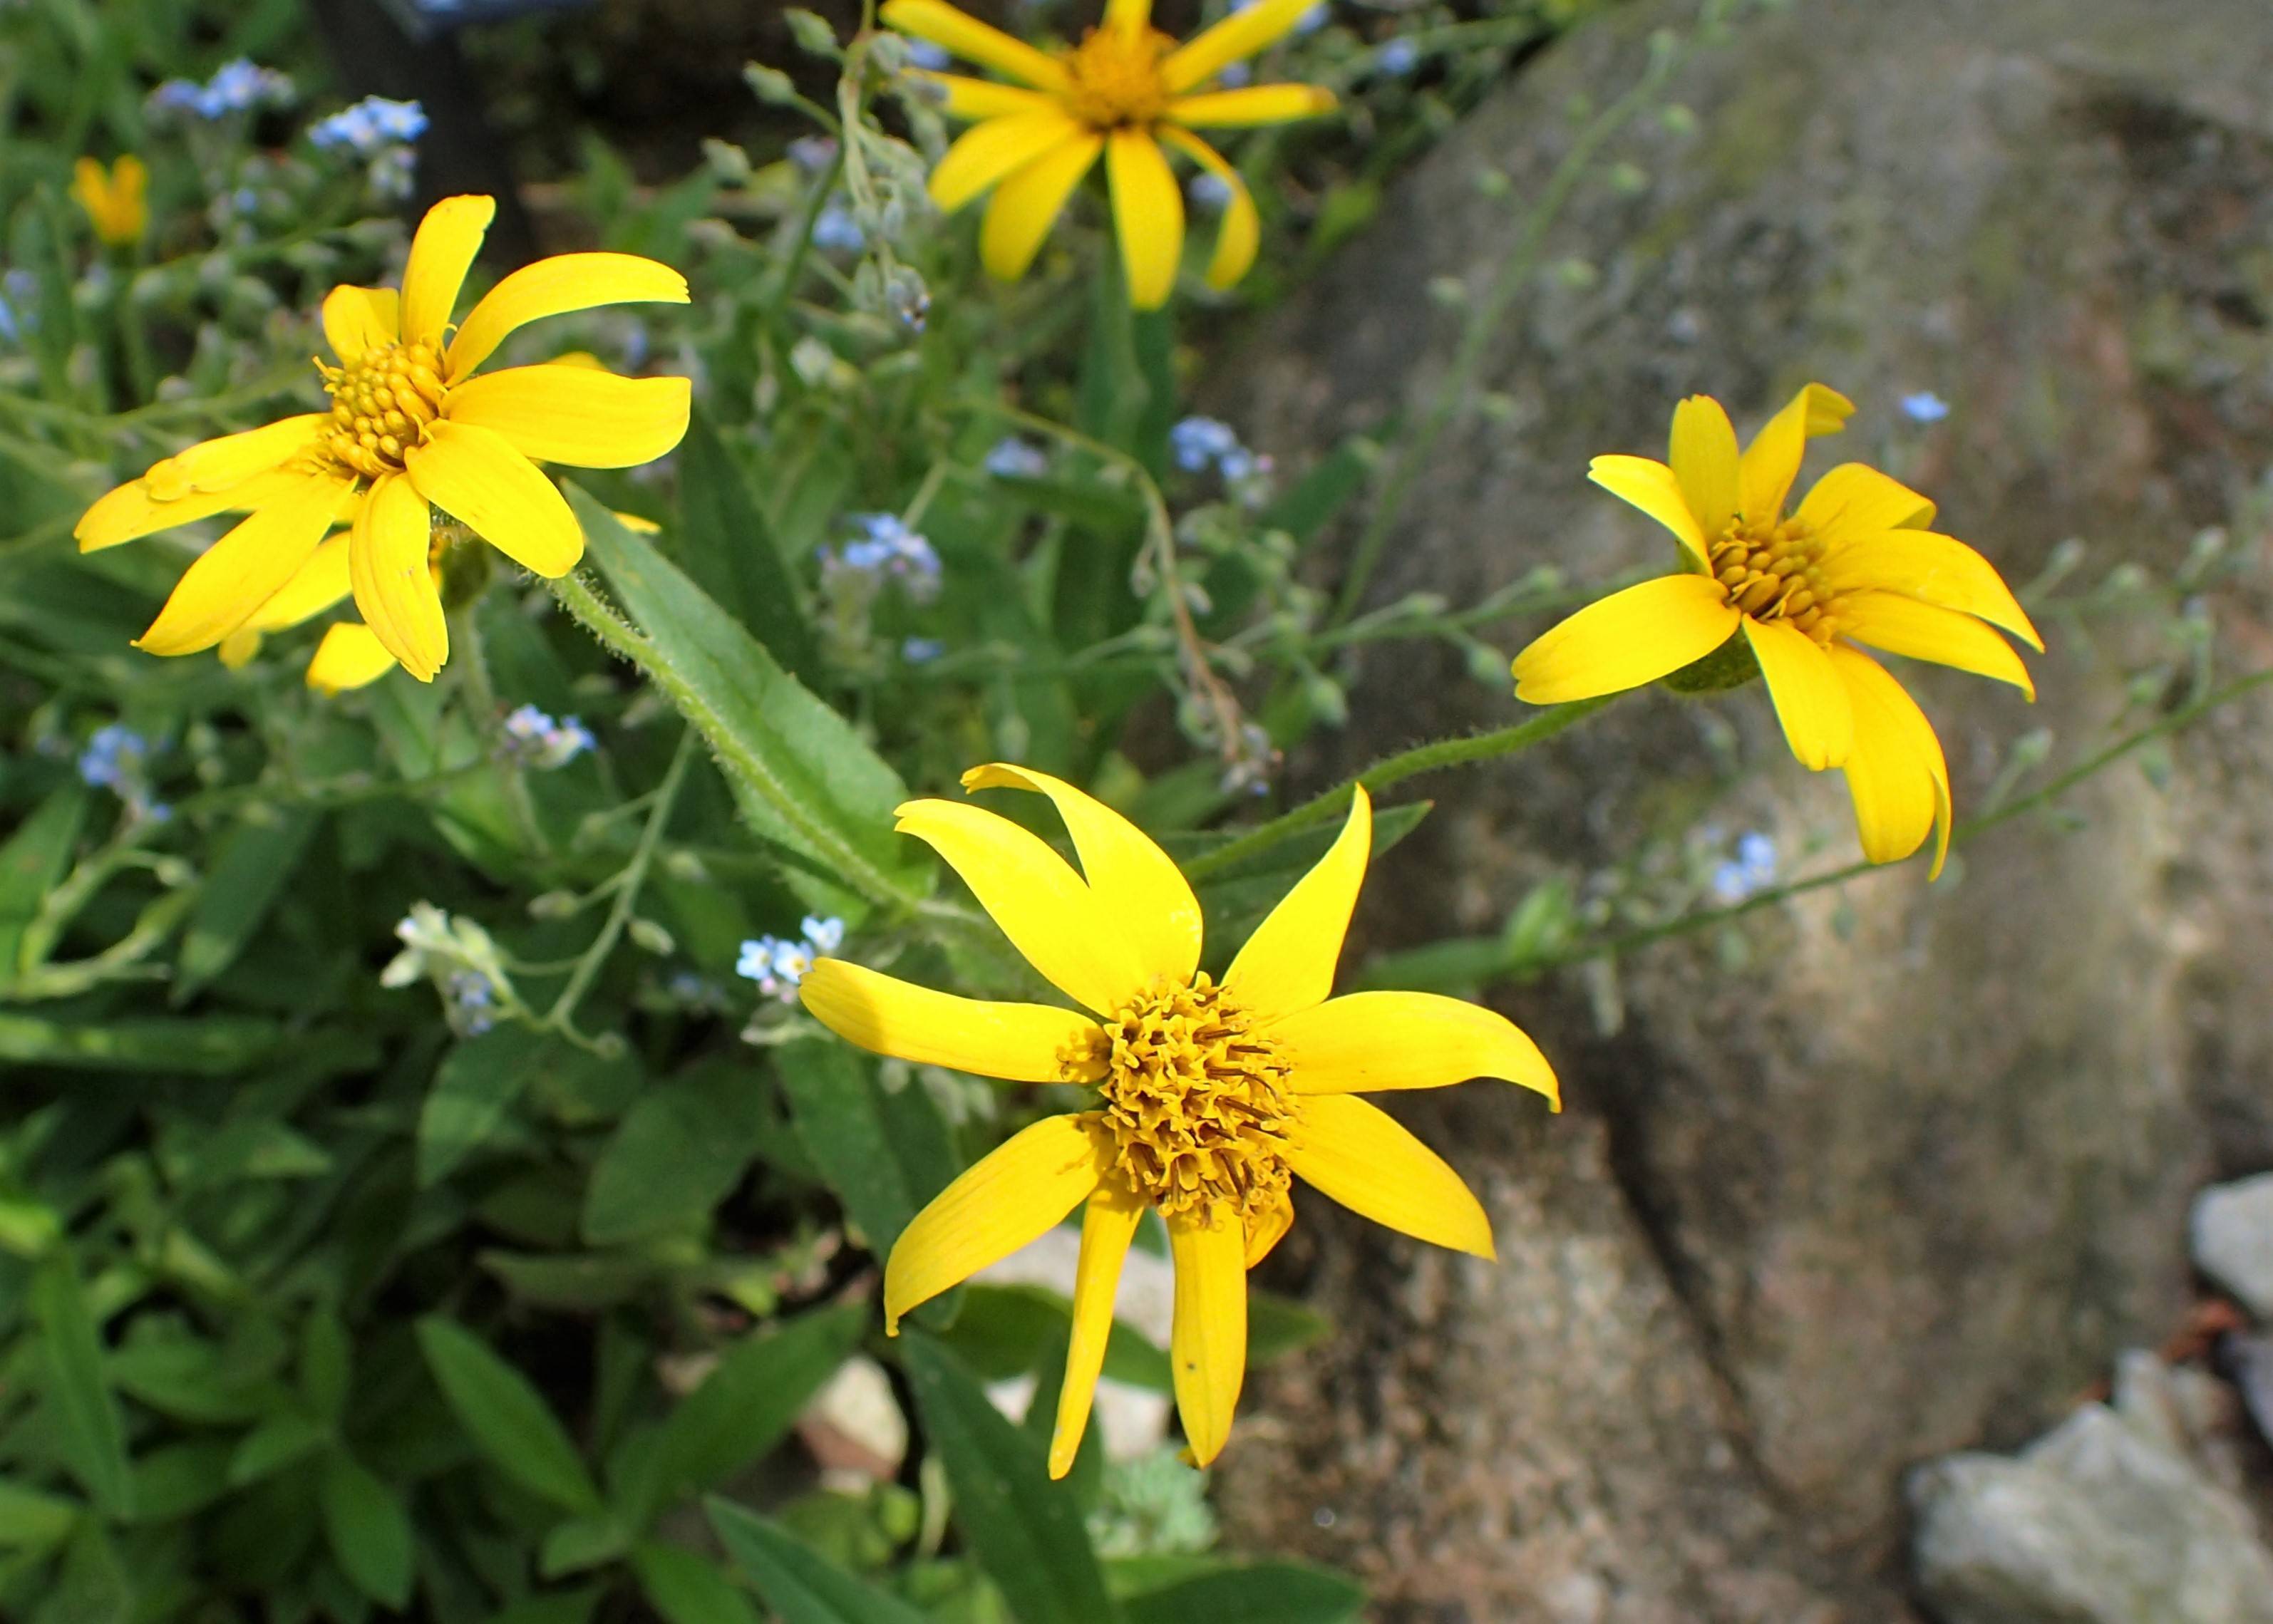 bright-yellow flowers with yellow center, green leaves and stems